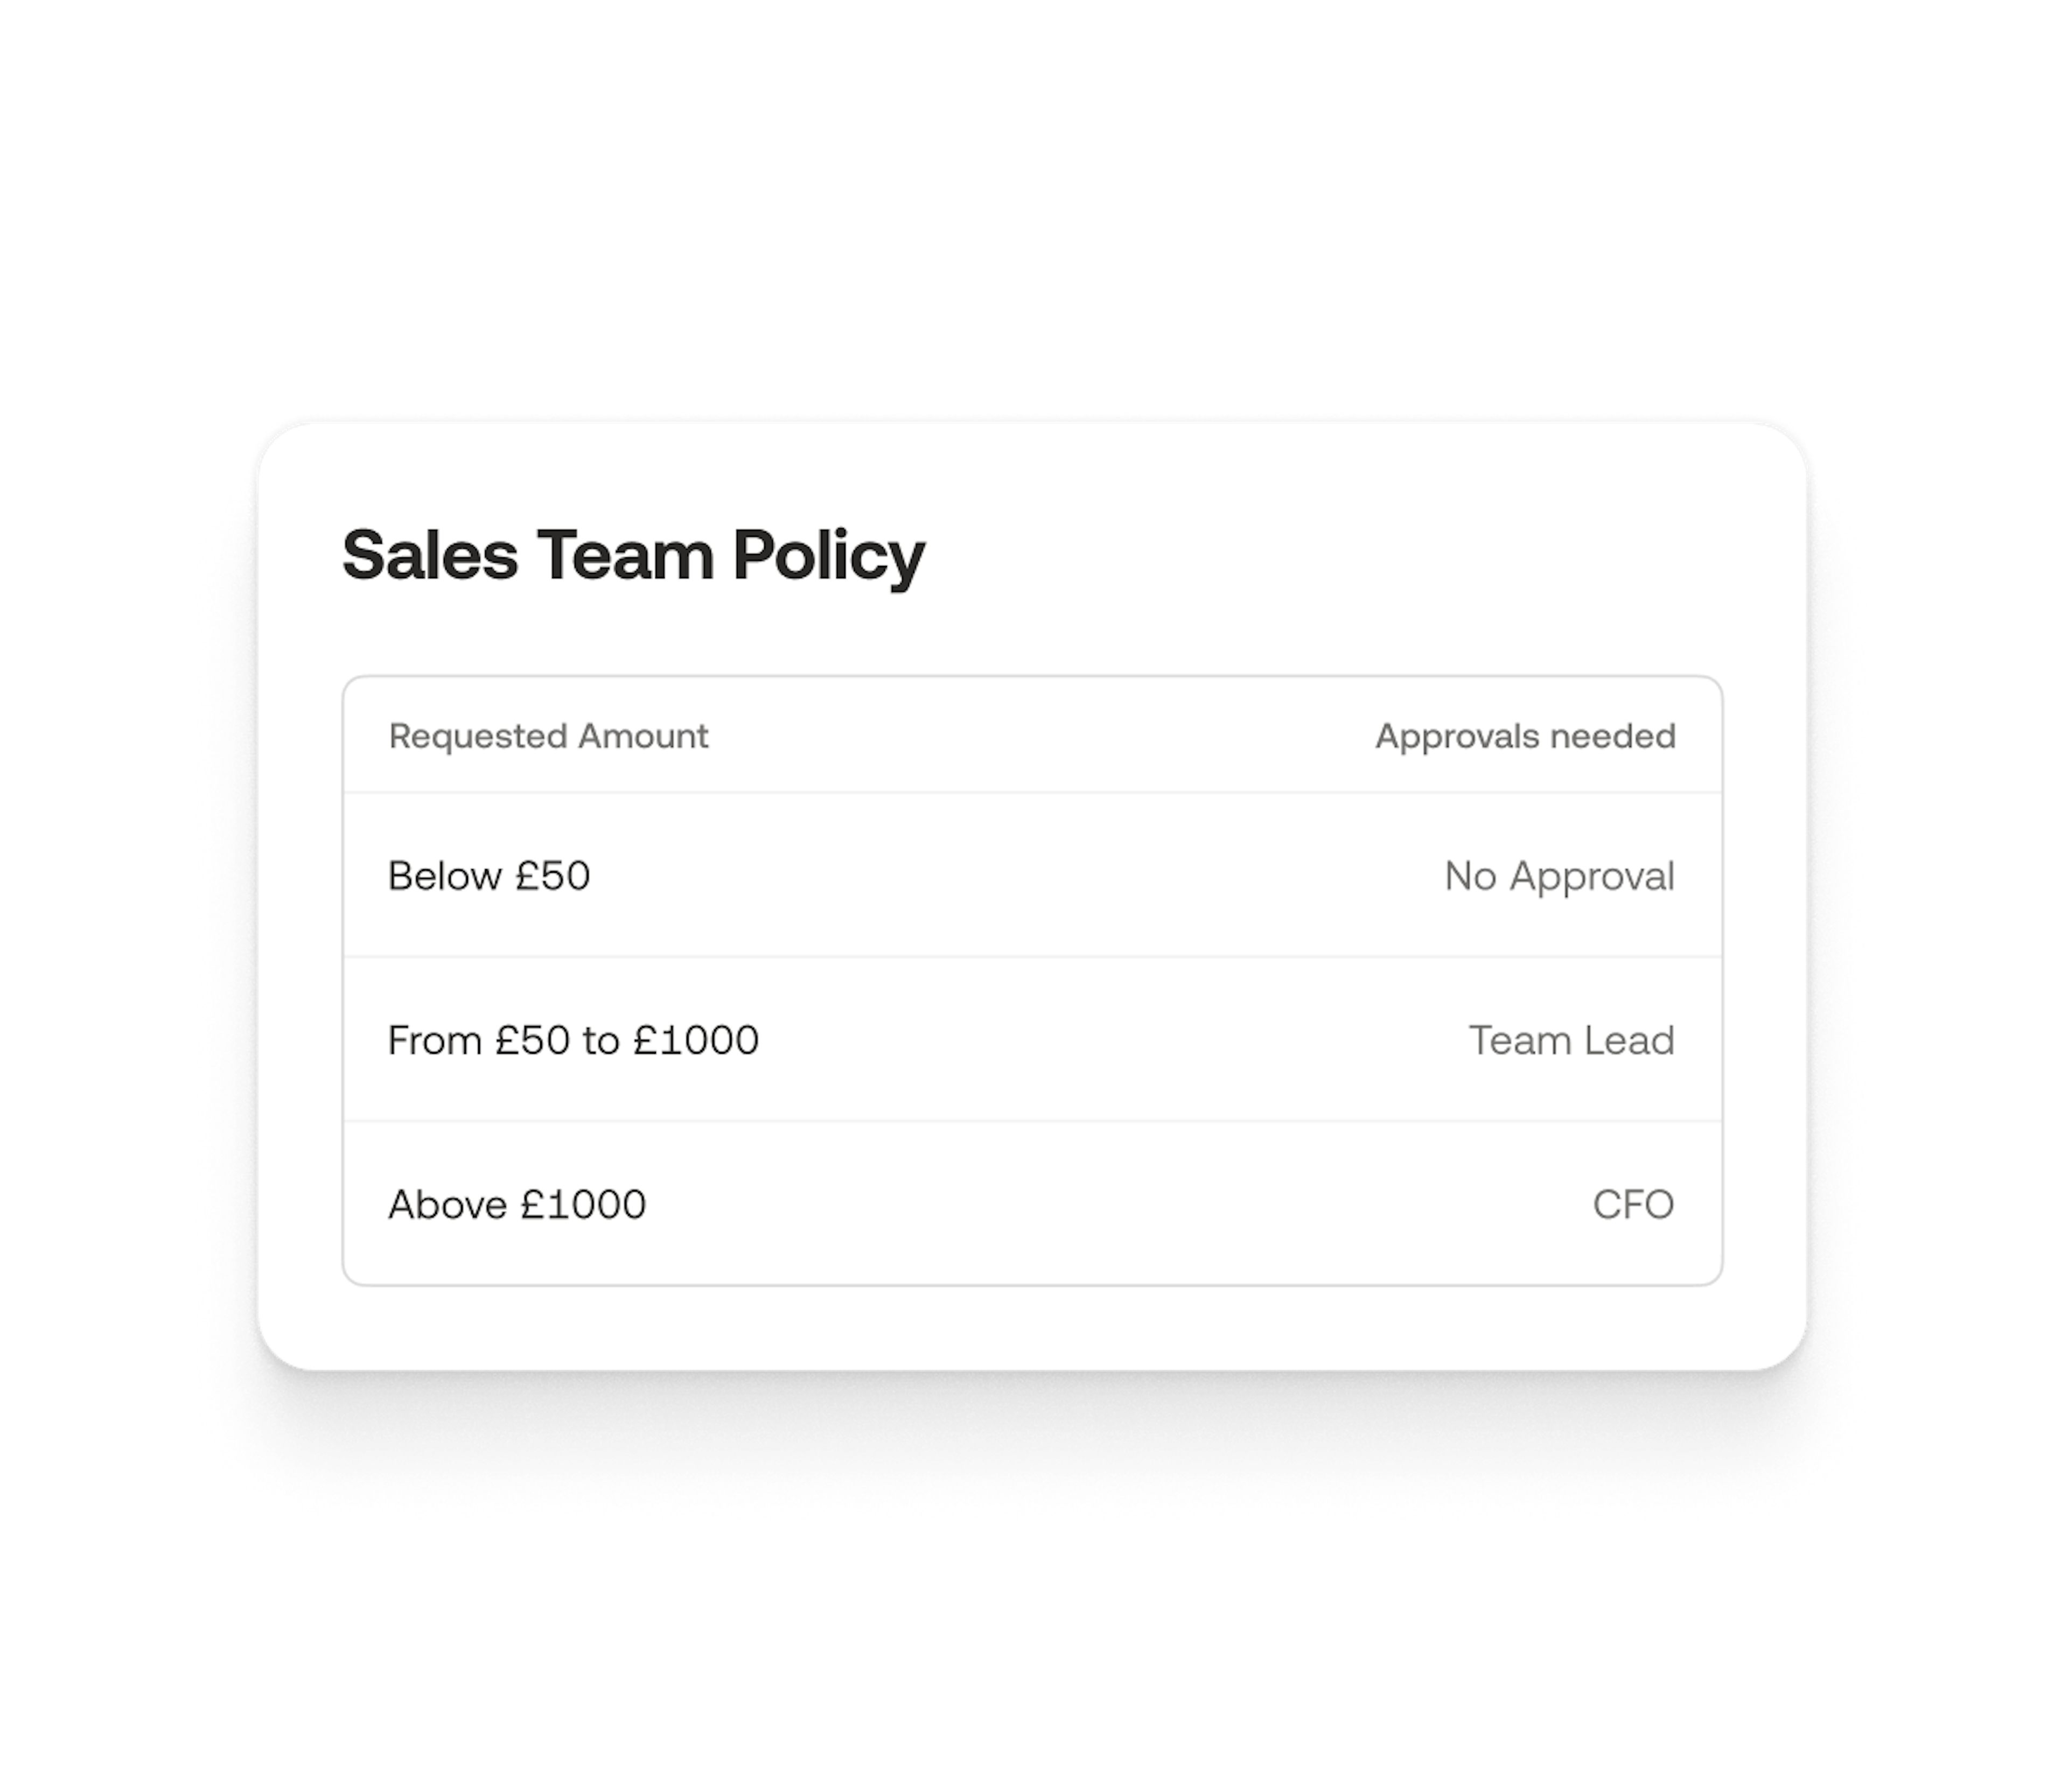 Sales Team Policy